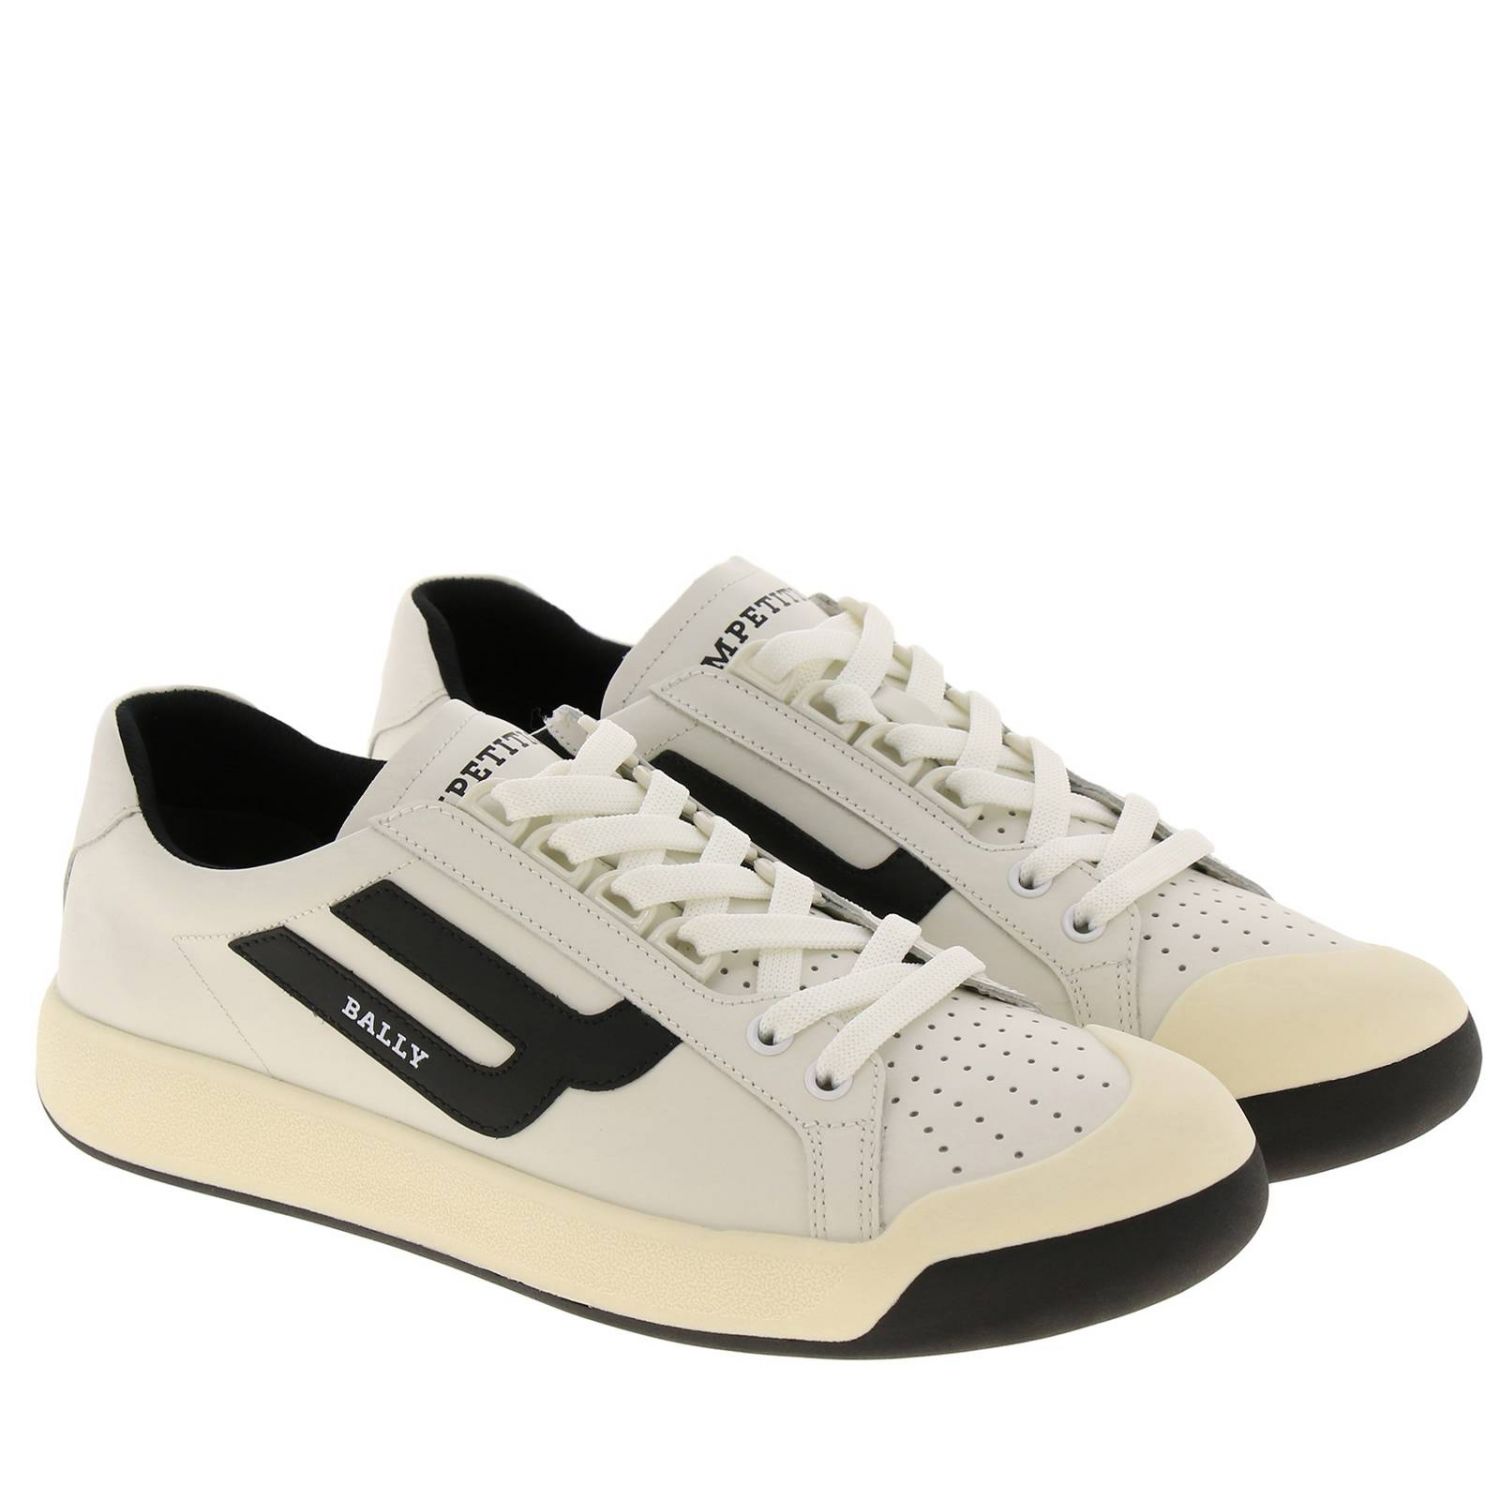 Bally Outlet: New competition sneakers in leather with micro holes and